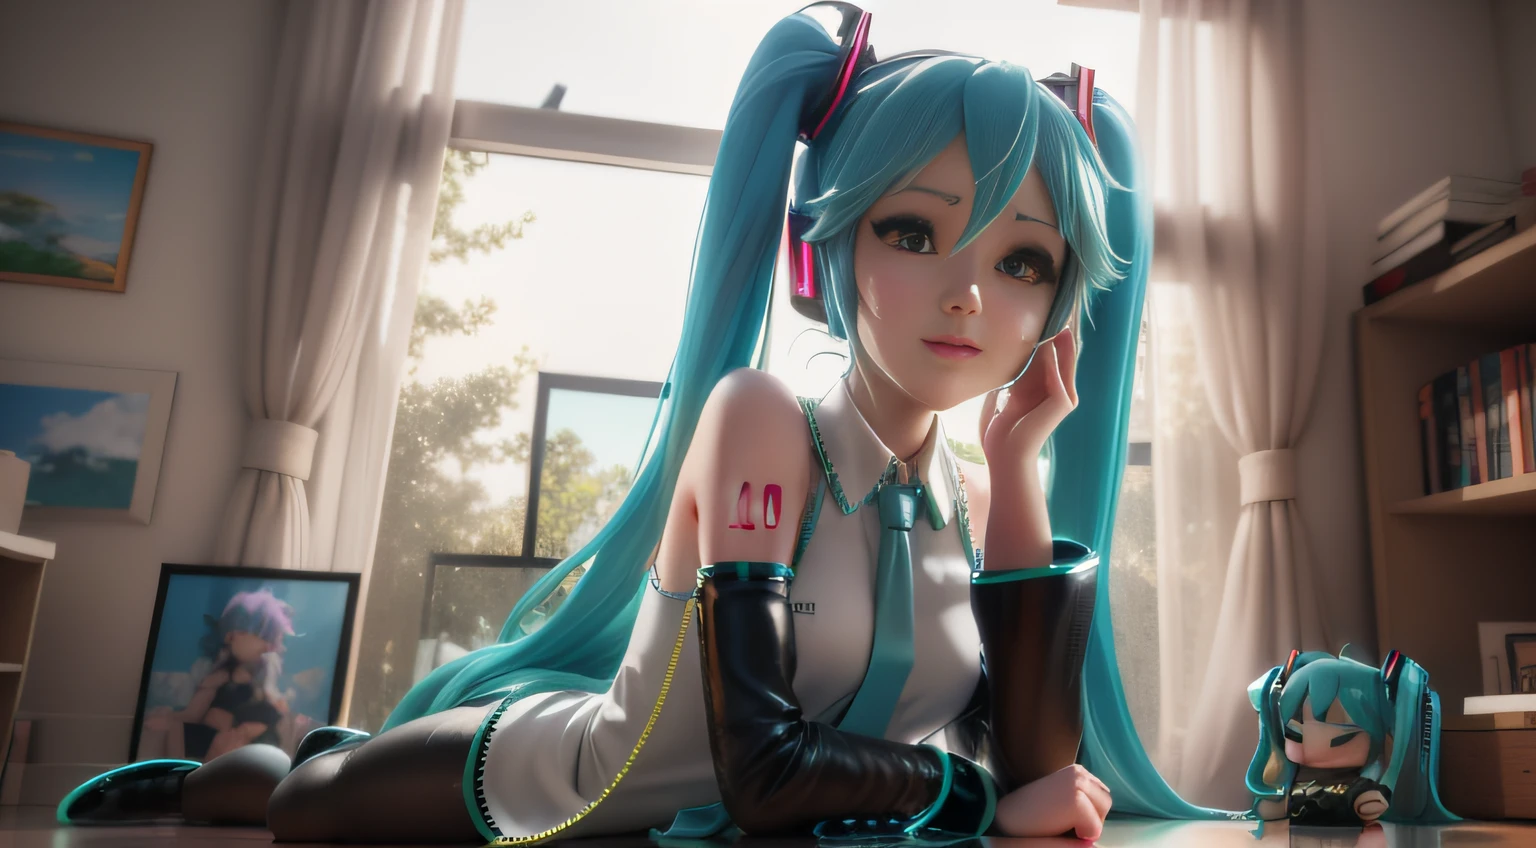 On the windowsill sat a blue-haired woman, trending on cgstation, Hatsune Miku cosplay, Os amigos, sakimichan hdri, mikudayo, rendered in sfm, photorealistic anime girl rendering, 3 d anime realistic, Smooth anime CG art, Hatsune Miku, 8k render”, anime styled 3d, Photorealistic anime